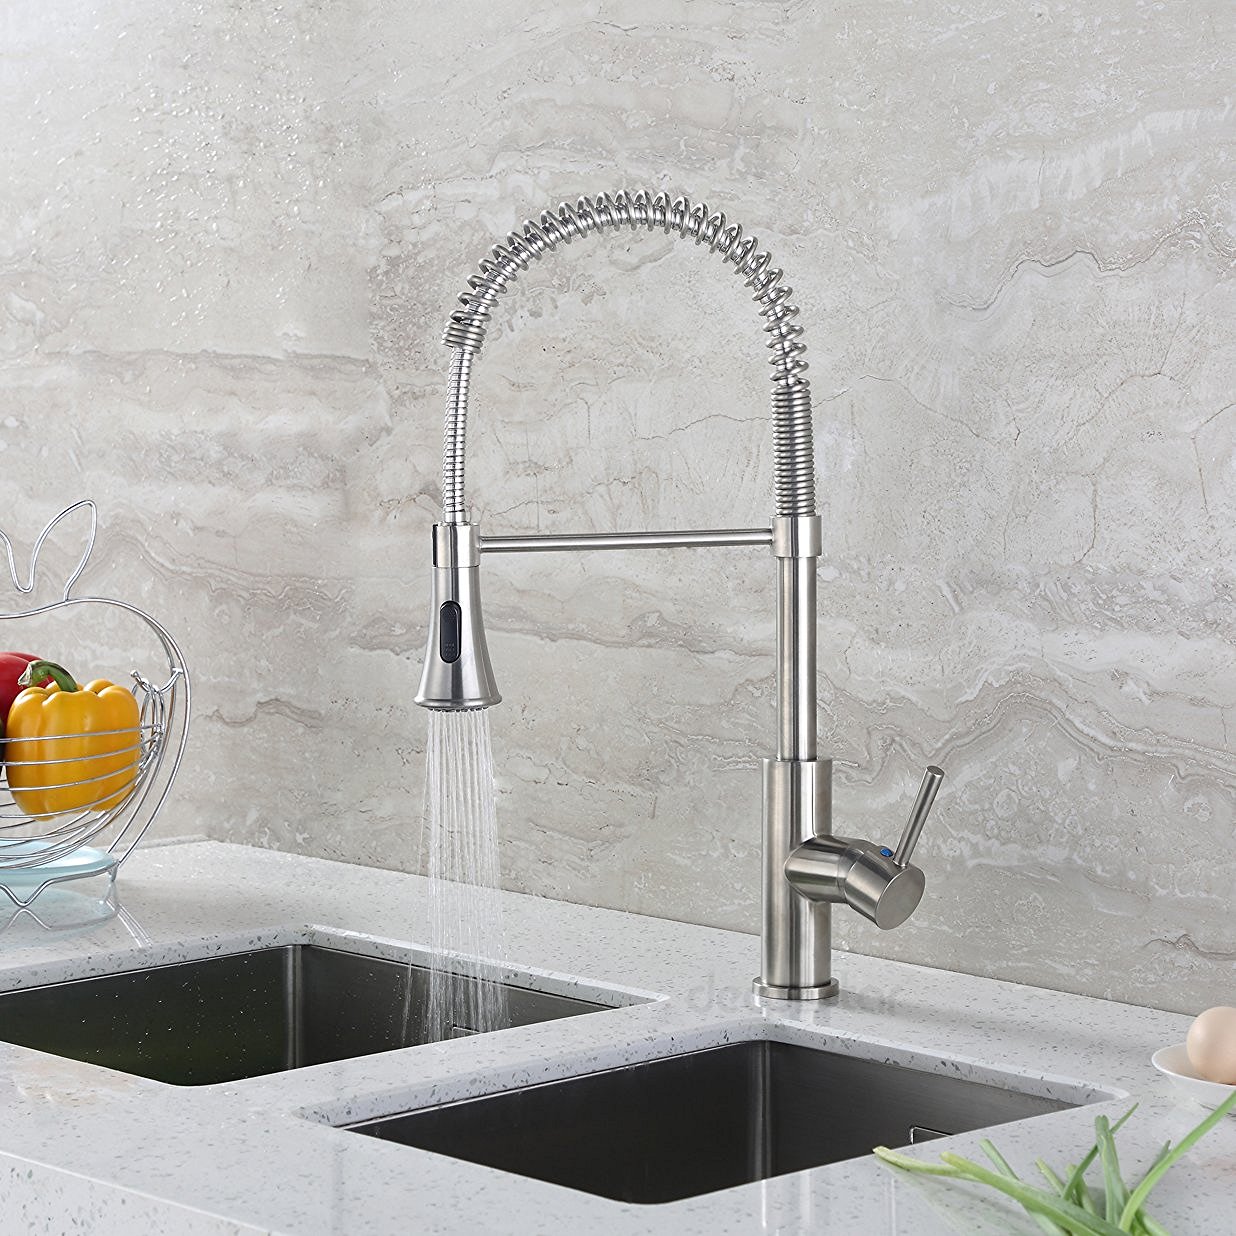 Merritt Contemporary Kitchen Sink Faucet with Pull Down Spray